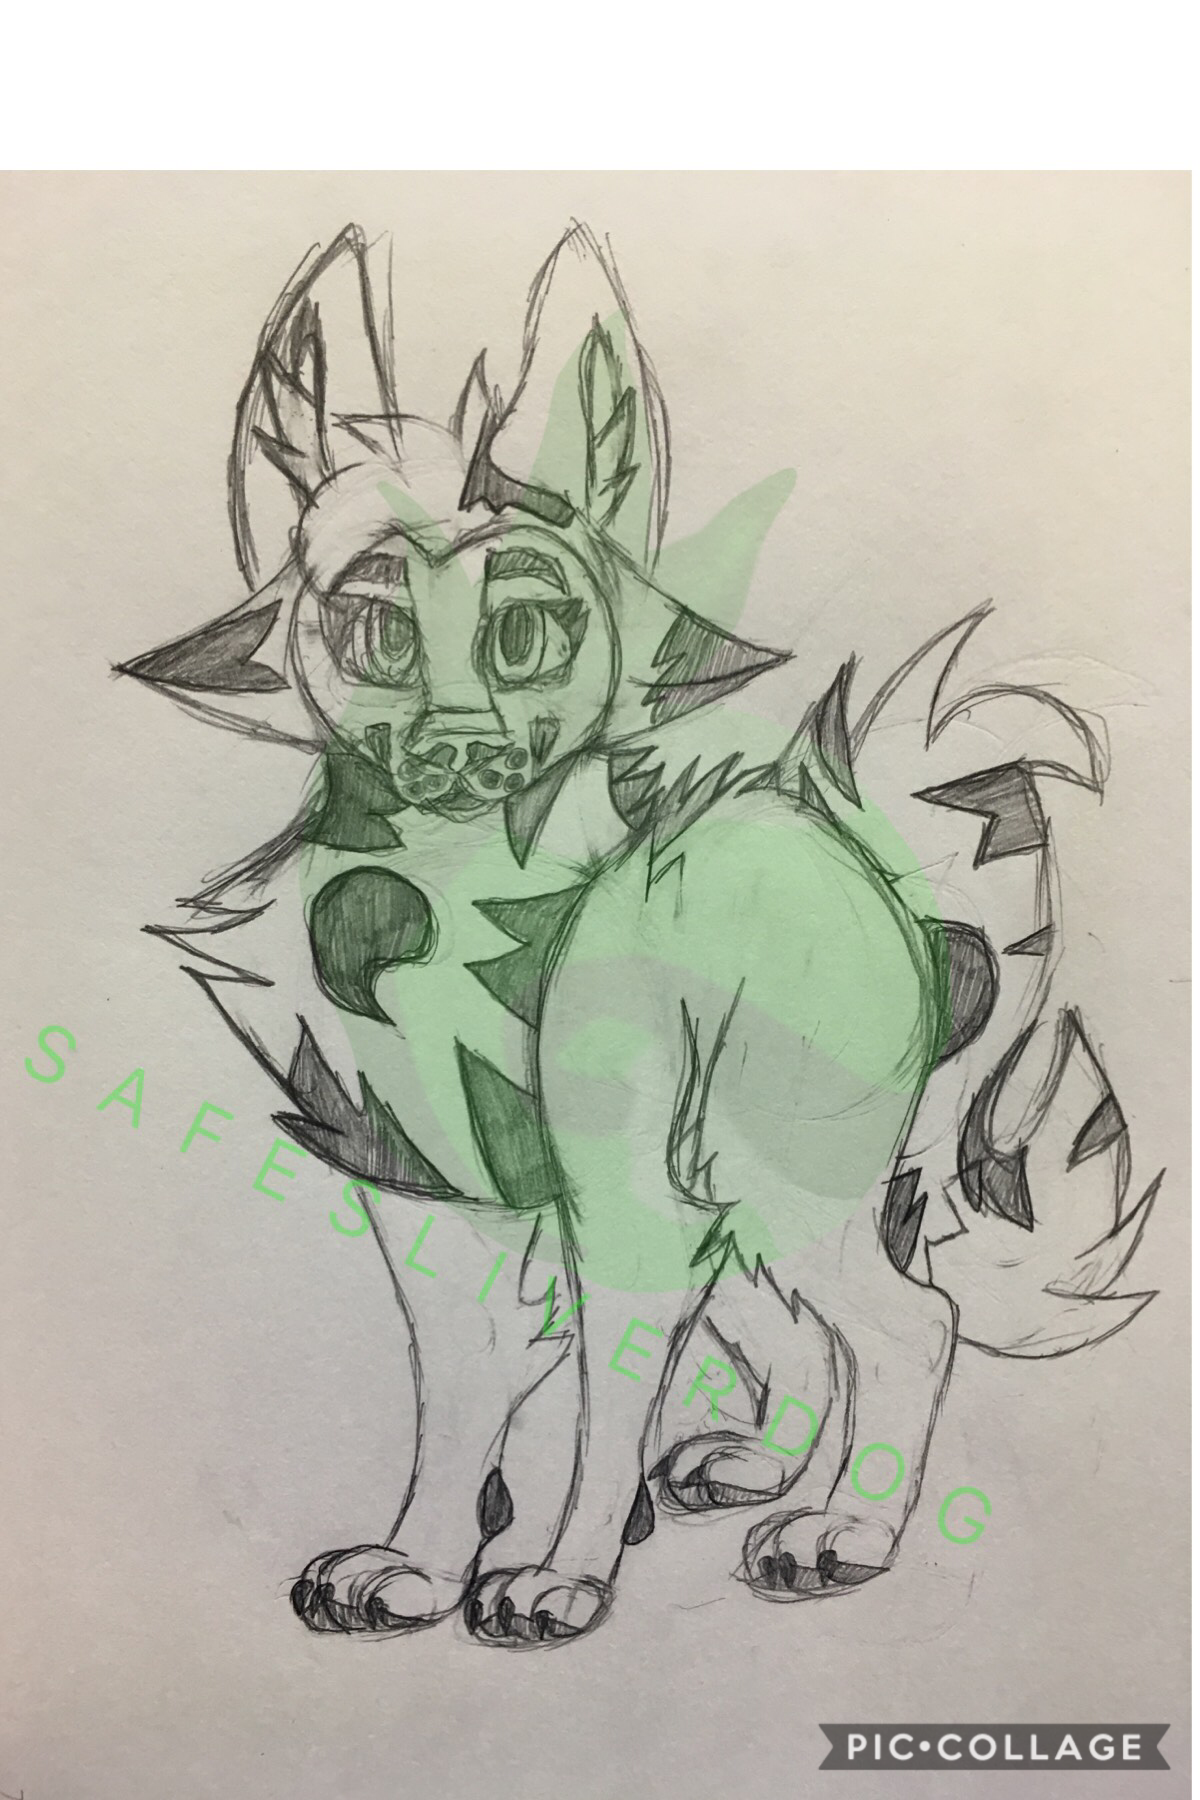 ✏️TAP!✏️
Here’s a small sketch I did at work today UwU 
I get a day off tomorrow so I’ll be working on my art trades yEE 